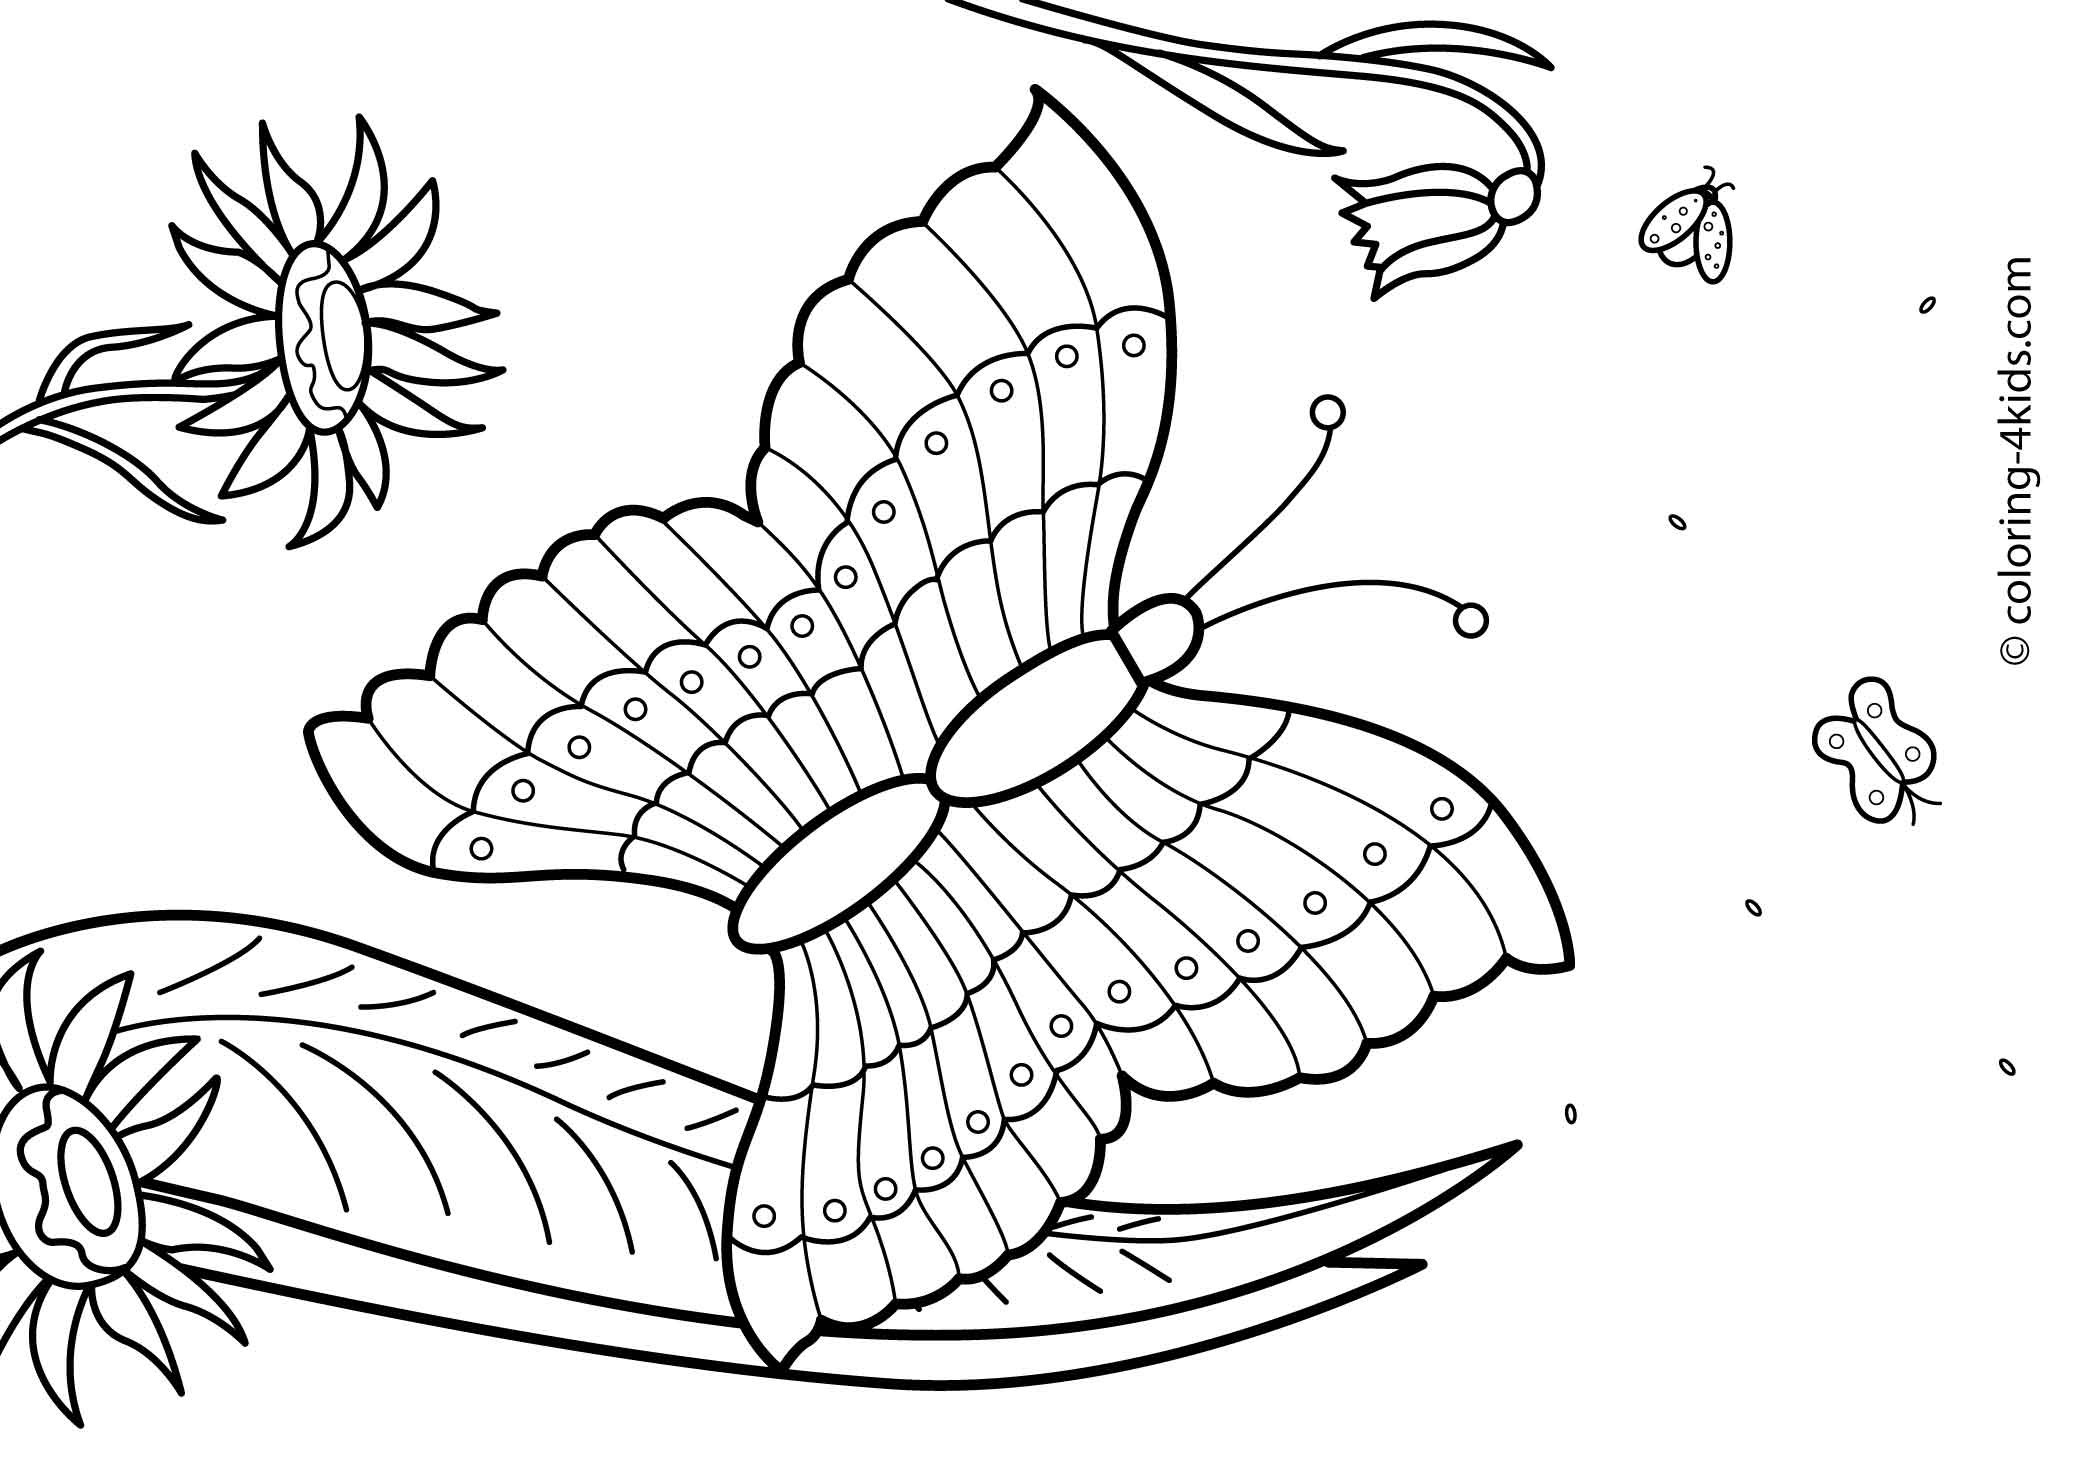 Summer Coloring Sheets For Kids
 27 Summer season coloring pages part 2